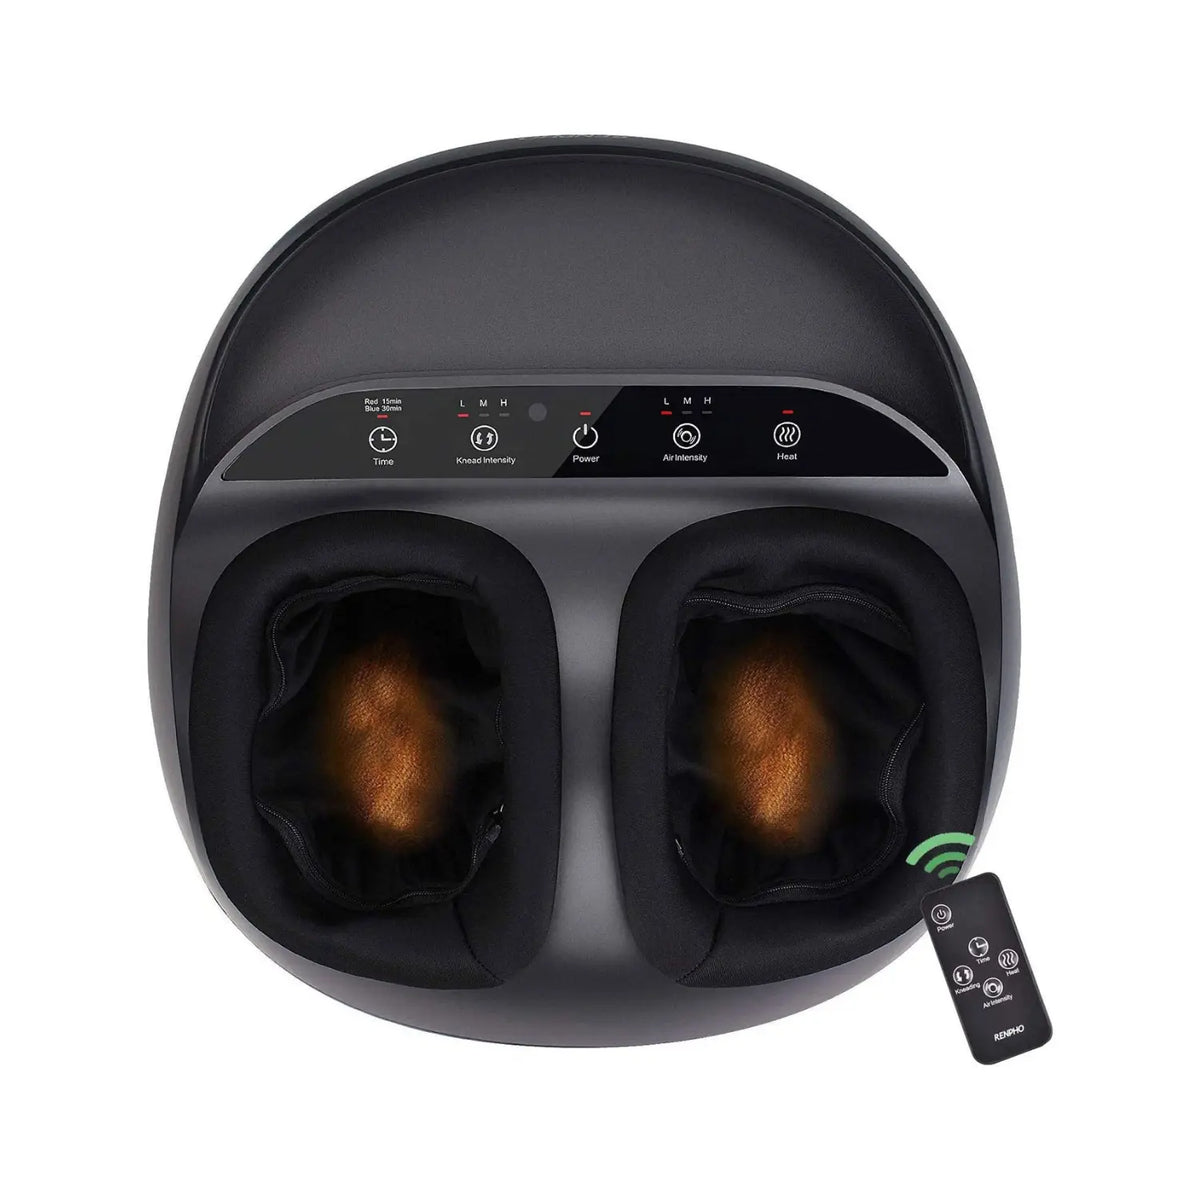 Top-down view of a Renpho EU Shiatsu Foot Massager Premium with two foot slots, control buttons, and LED indicators on the main unit. A small black remote control with buttons for power, mode, and intensity lies beside it. The massager's foot slots are illuminated with a warm orange glow for a deep kneading foot massage to relax your body.